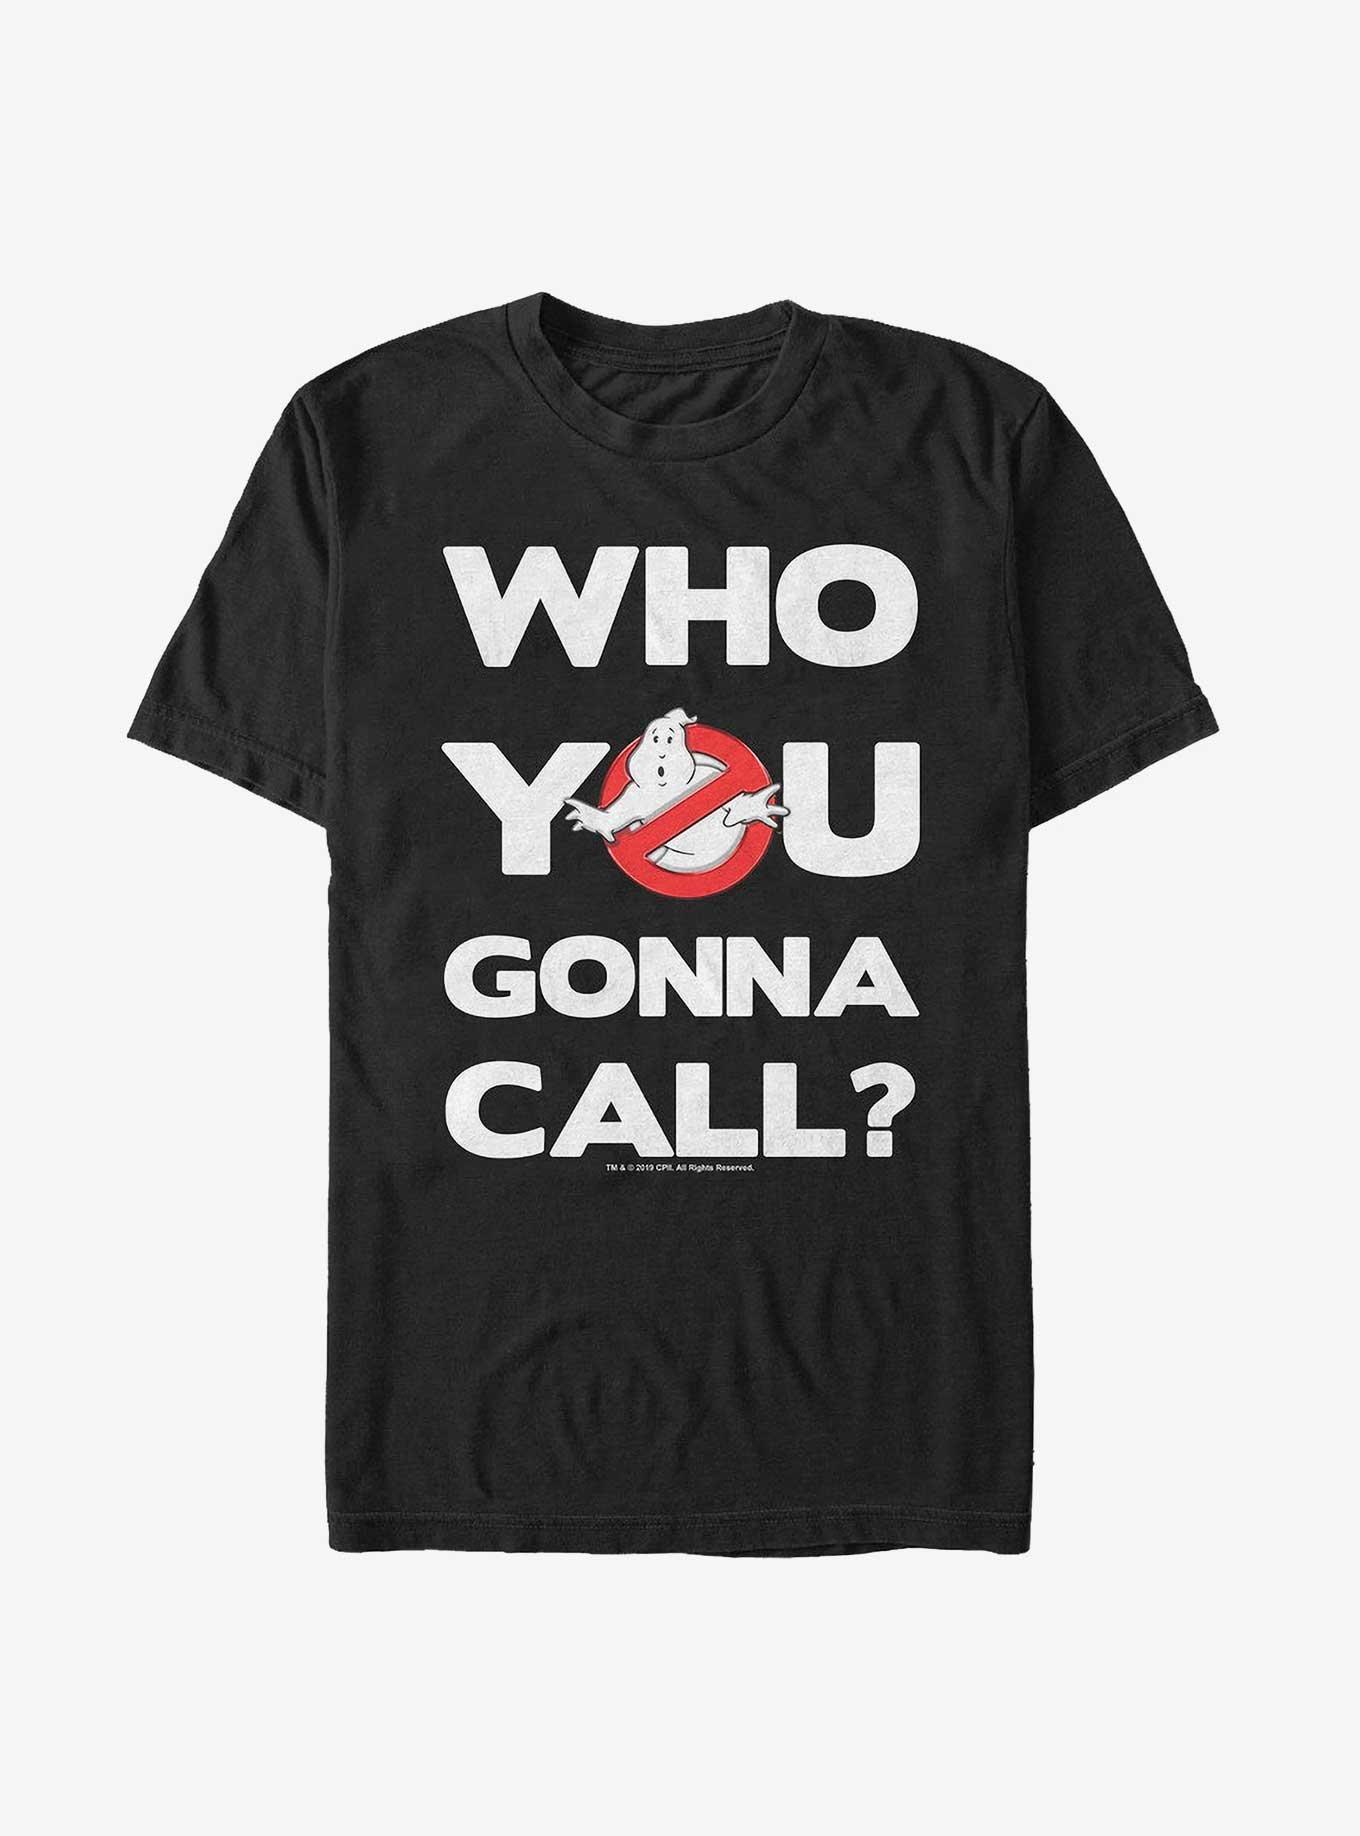 Ghostbusters Who You Gonna Call T-Shirt, BLACK, hi-res